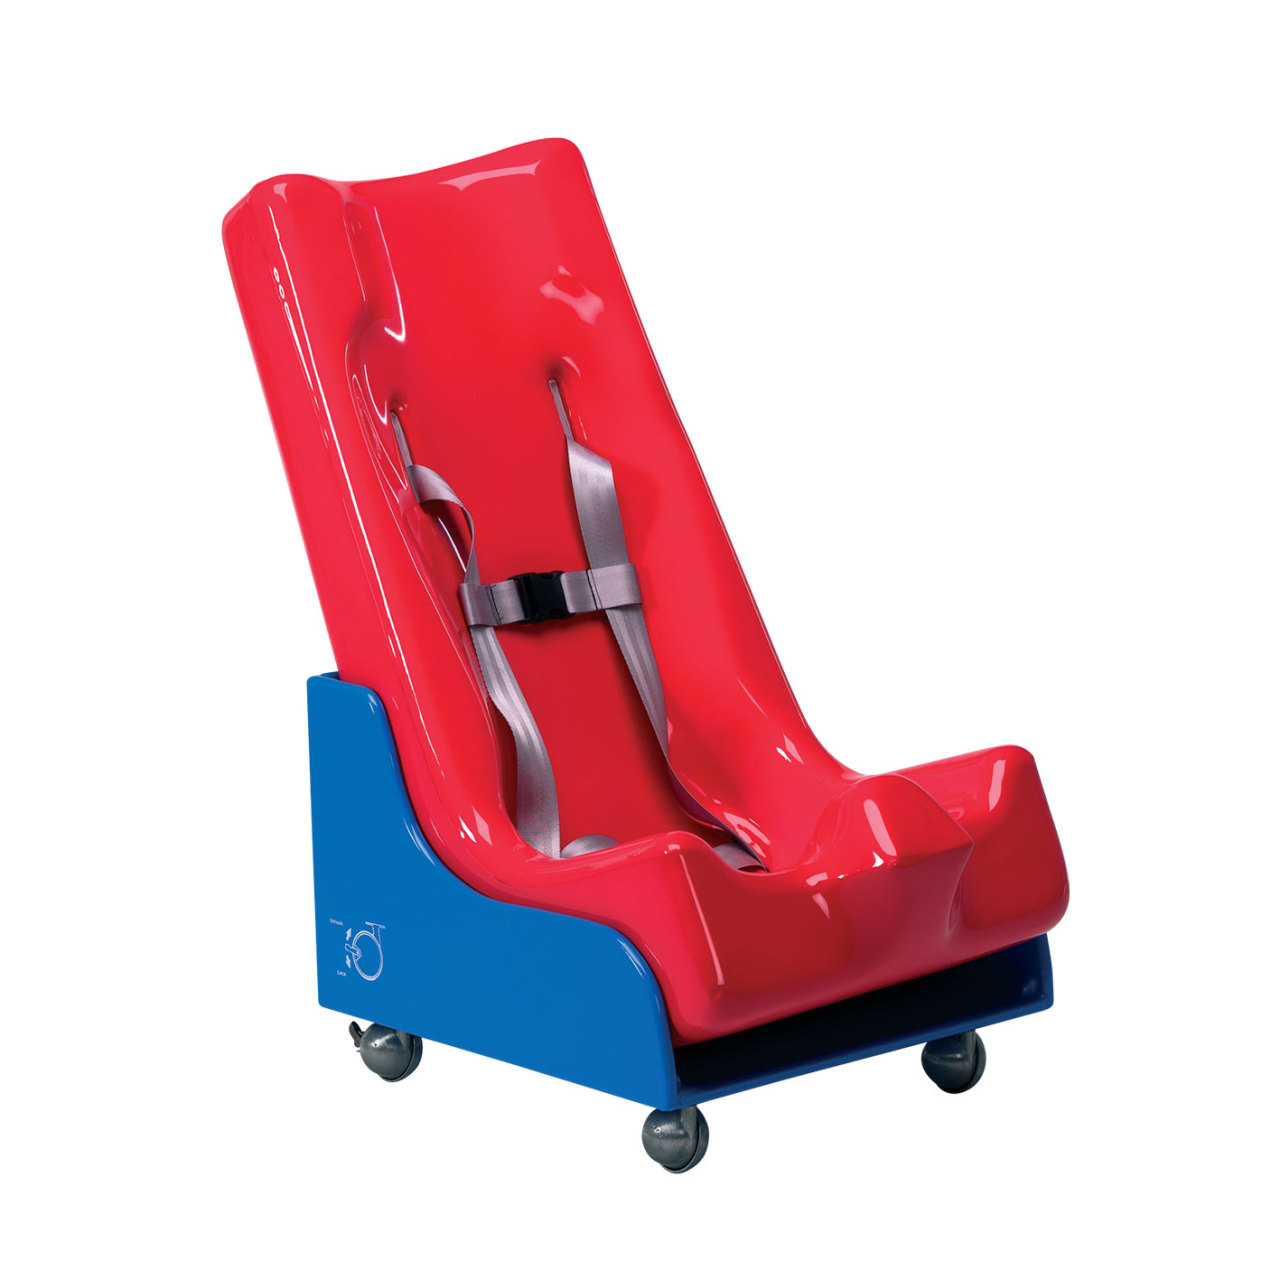 Mobile Bases For Tumble Forms II Feeder Seat